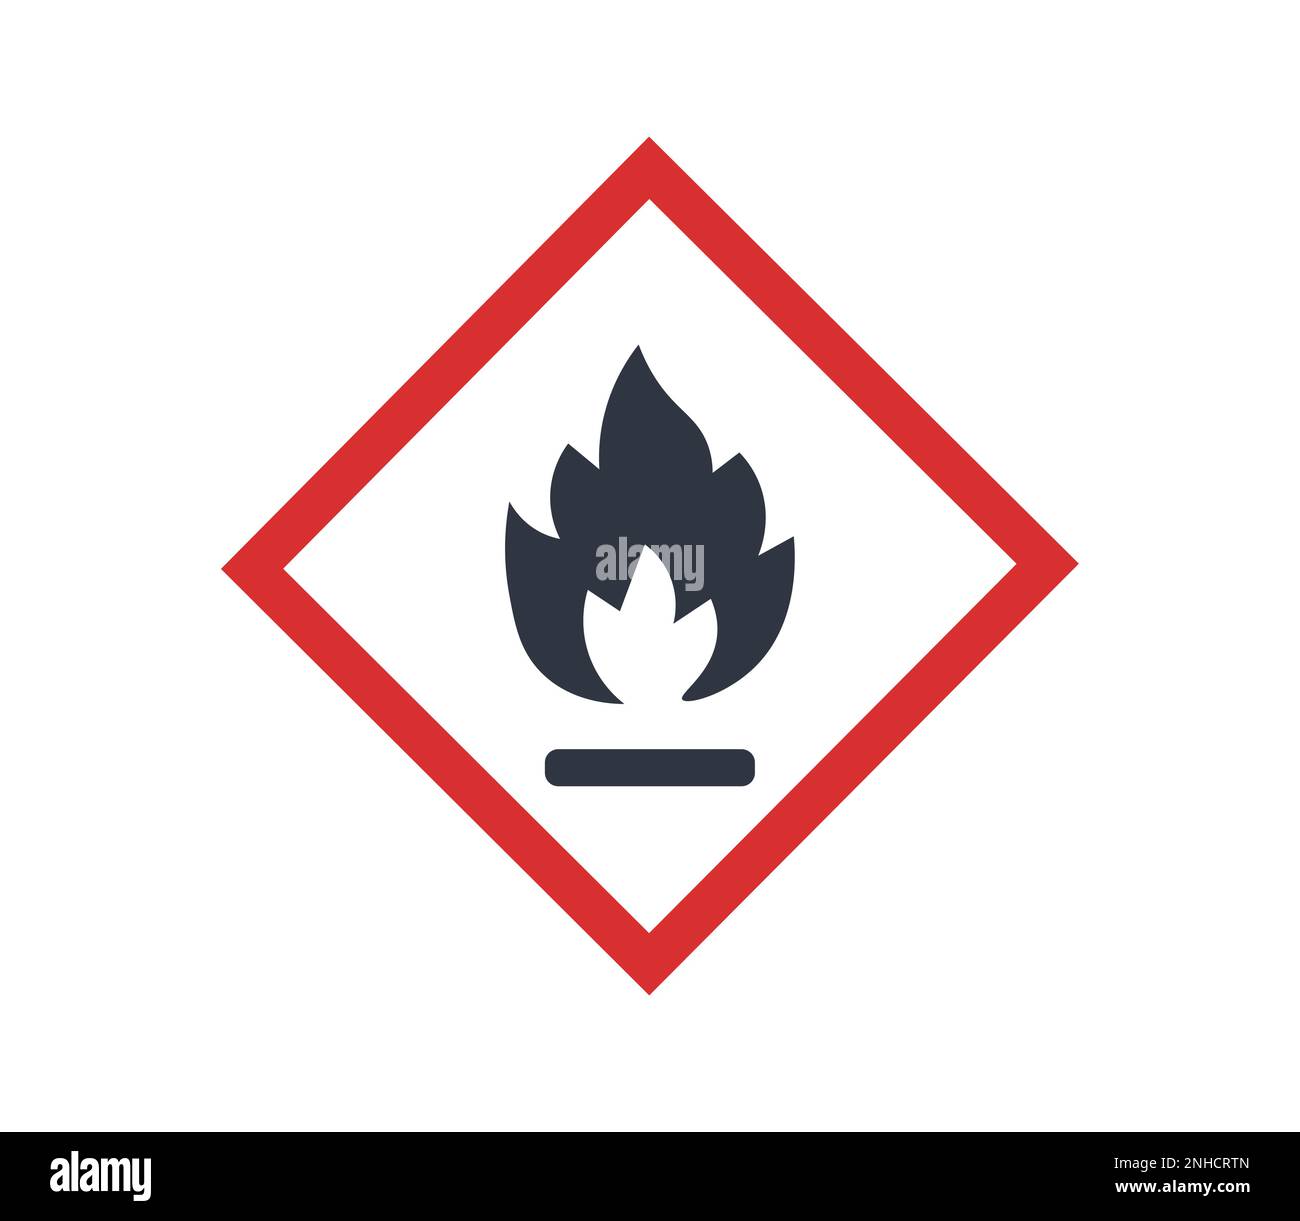 Flame pictogram for fire hazards. Concept of packaging and regulations. Stock Vector